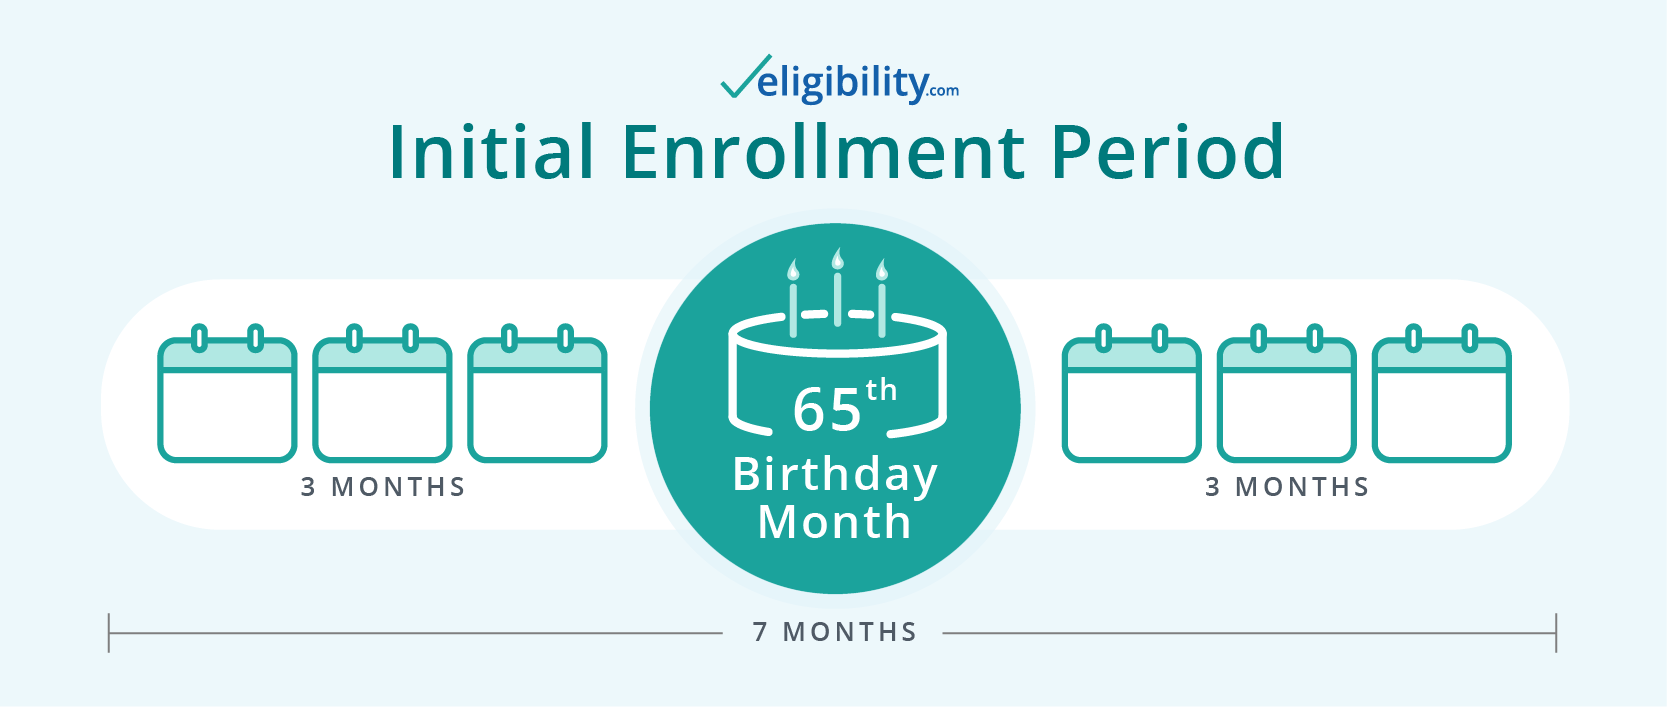 Medicare Enrollment Periods Which One is Right? Eligibility